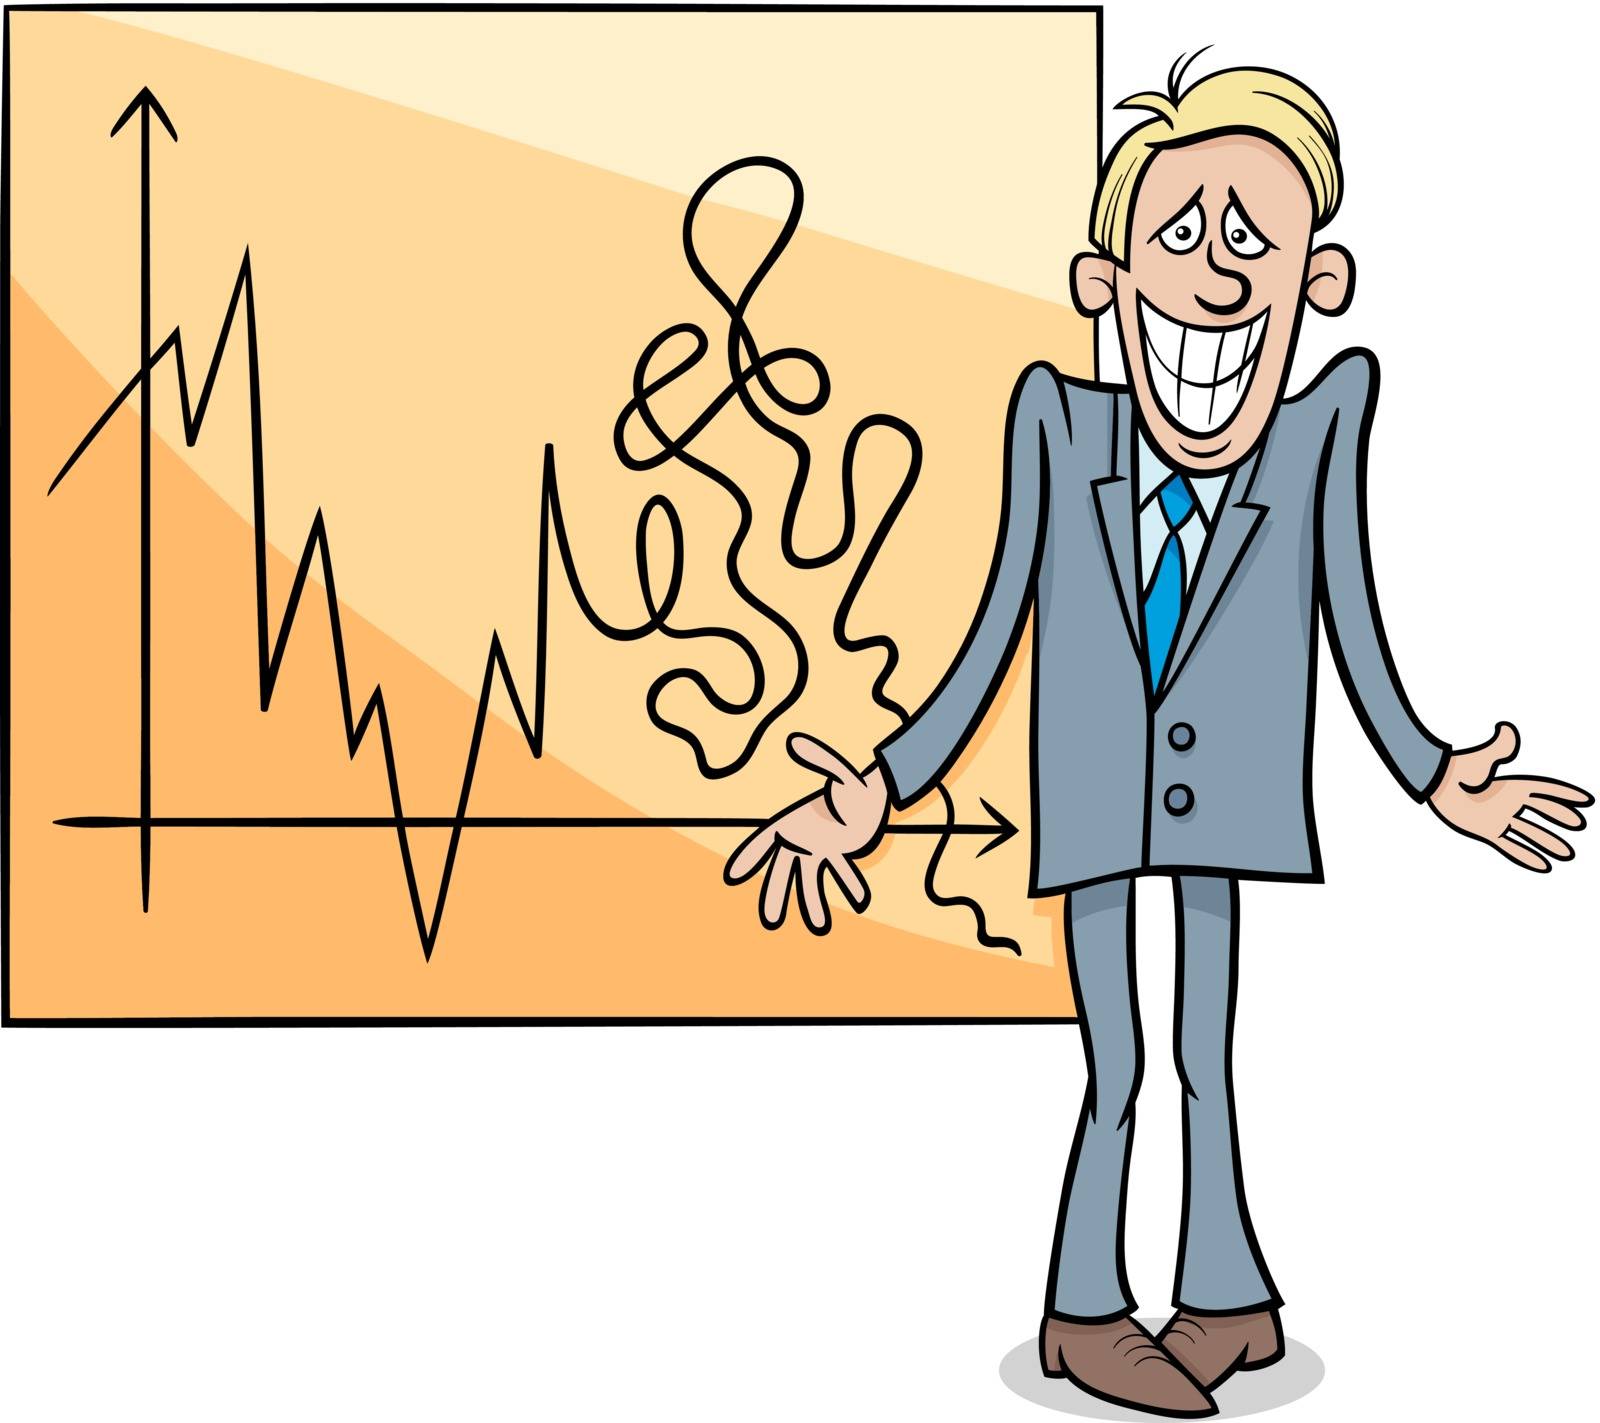 Concept Cartoon Illustration of Economic Crisis Diagram and Businessman with Cheesy Grin